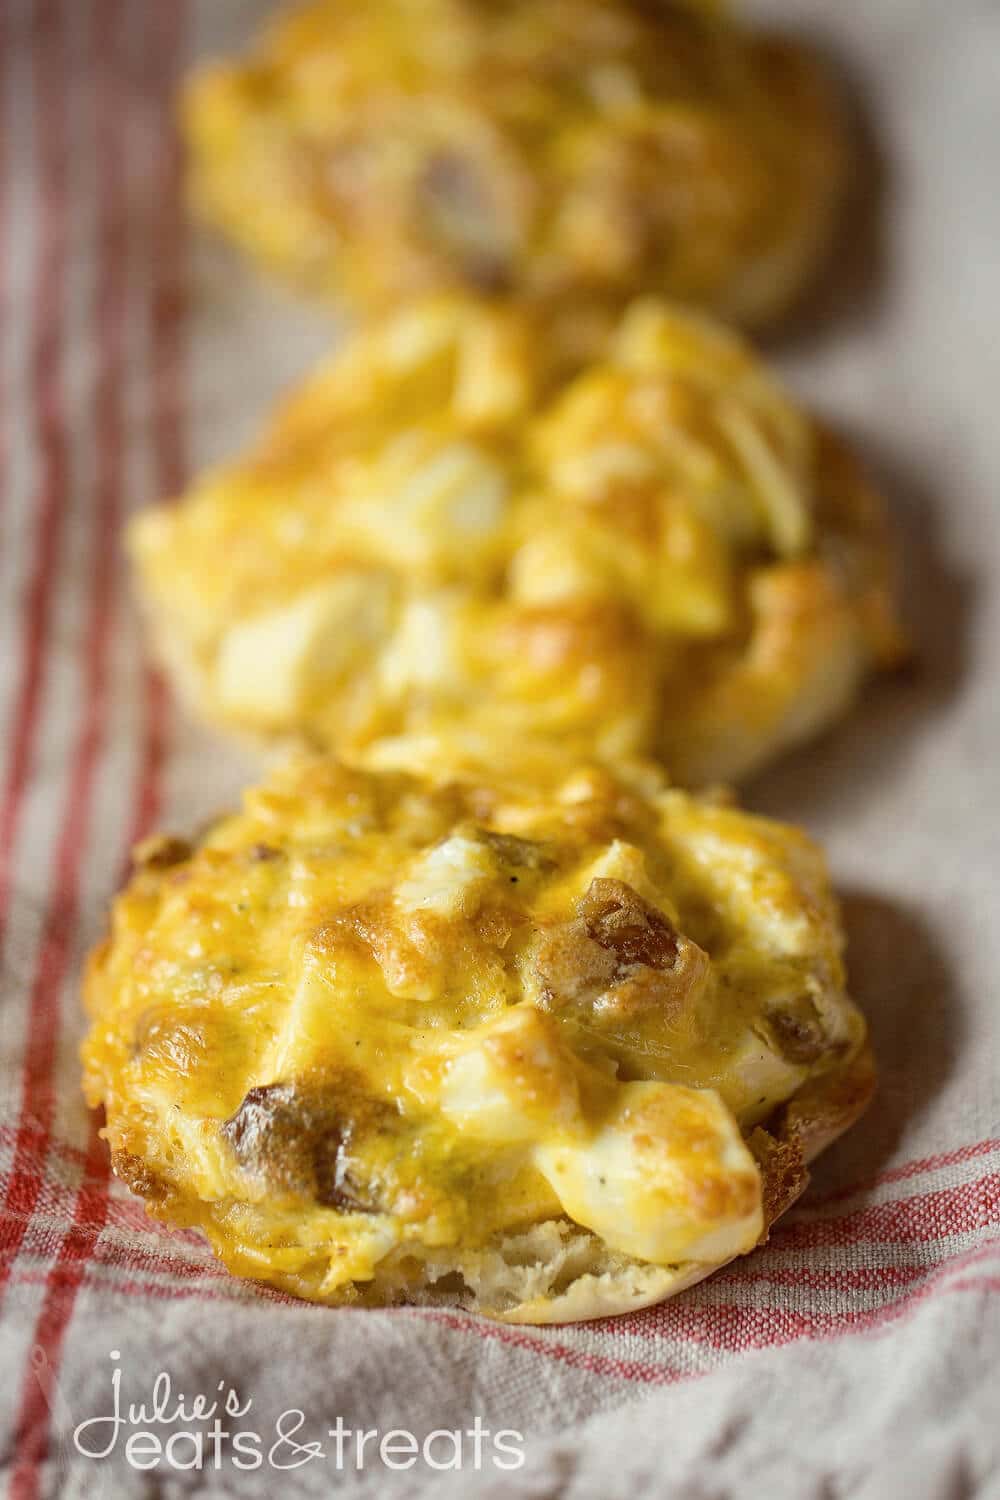 Make-Ahead Breakfast Muffin Melts ~ Melted Cheese, Warm Eggs and Bacon Piled on an English Muffin! Make Them Ahead, Warm Up and it's the Perfect Grab and Go Breakfast for on the Run!